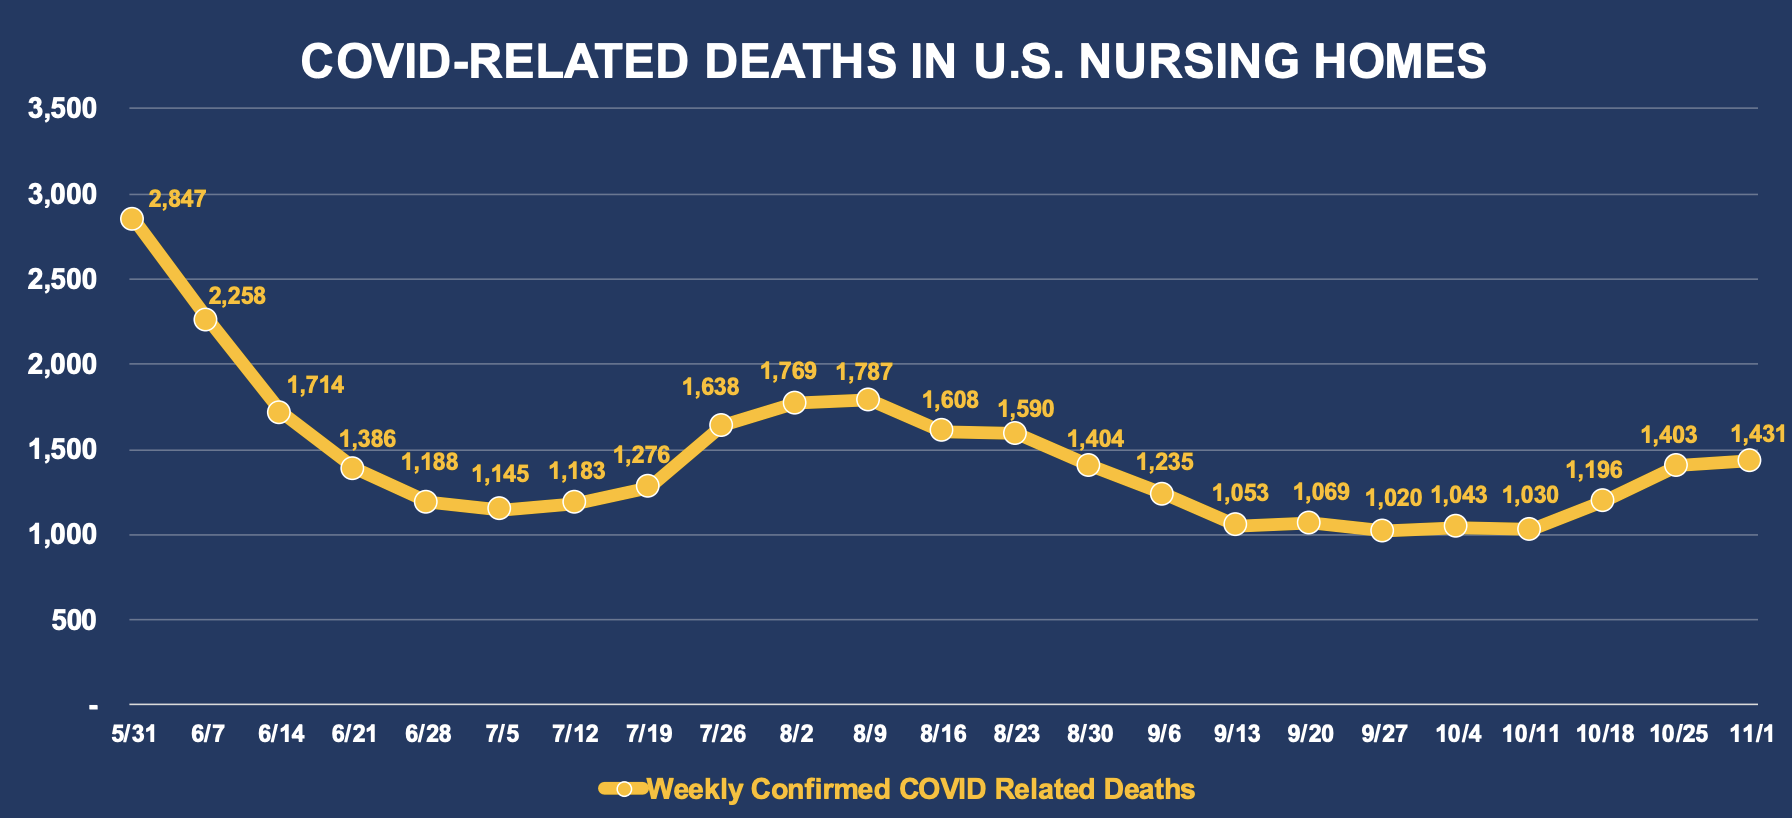 COVID-Related Deaths In U.S. Nursing Homes